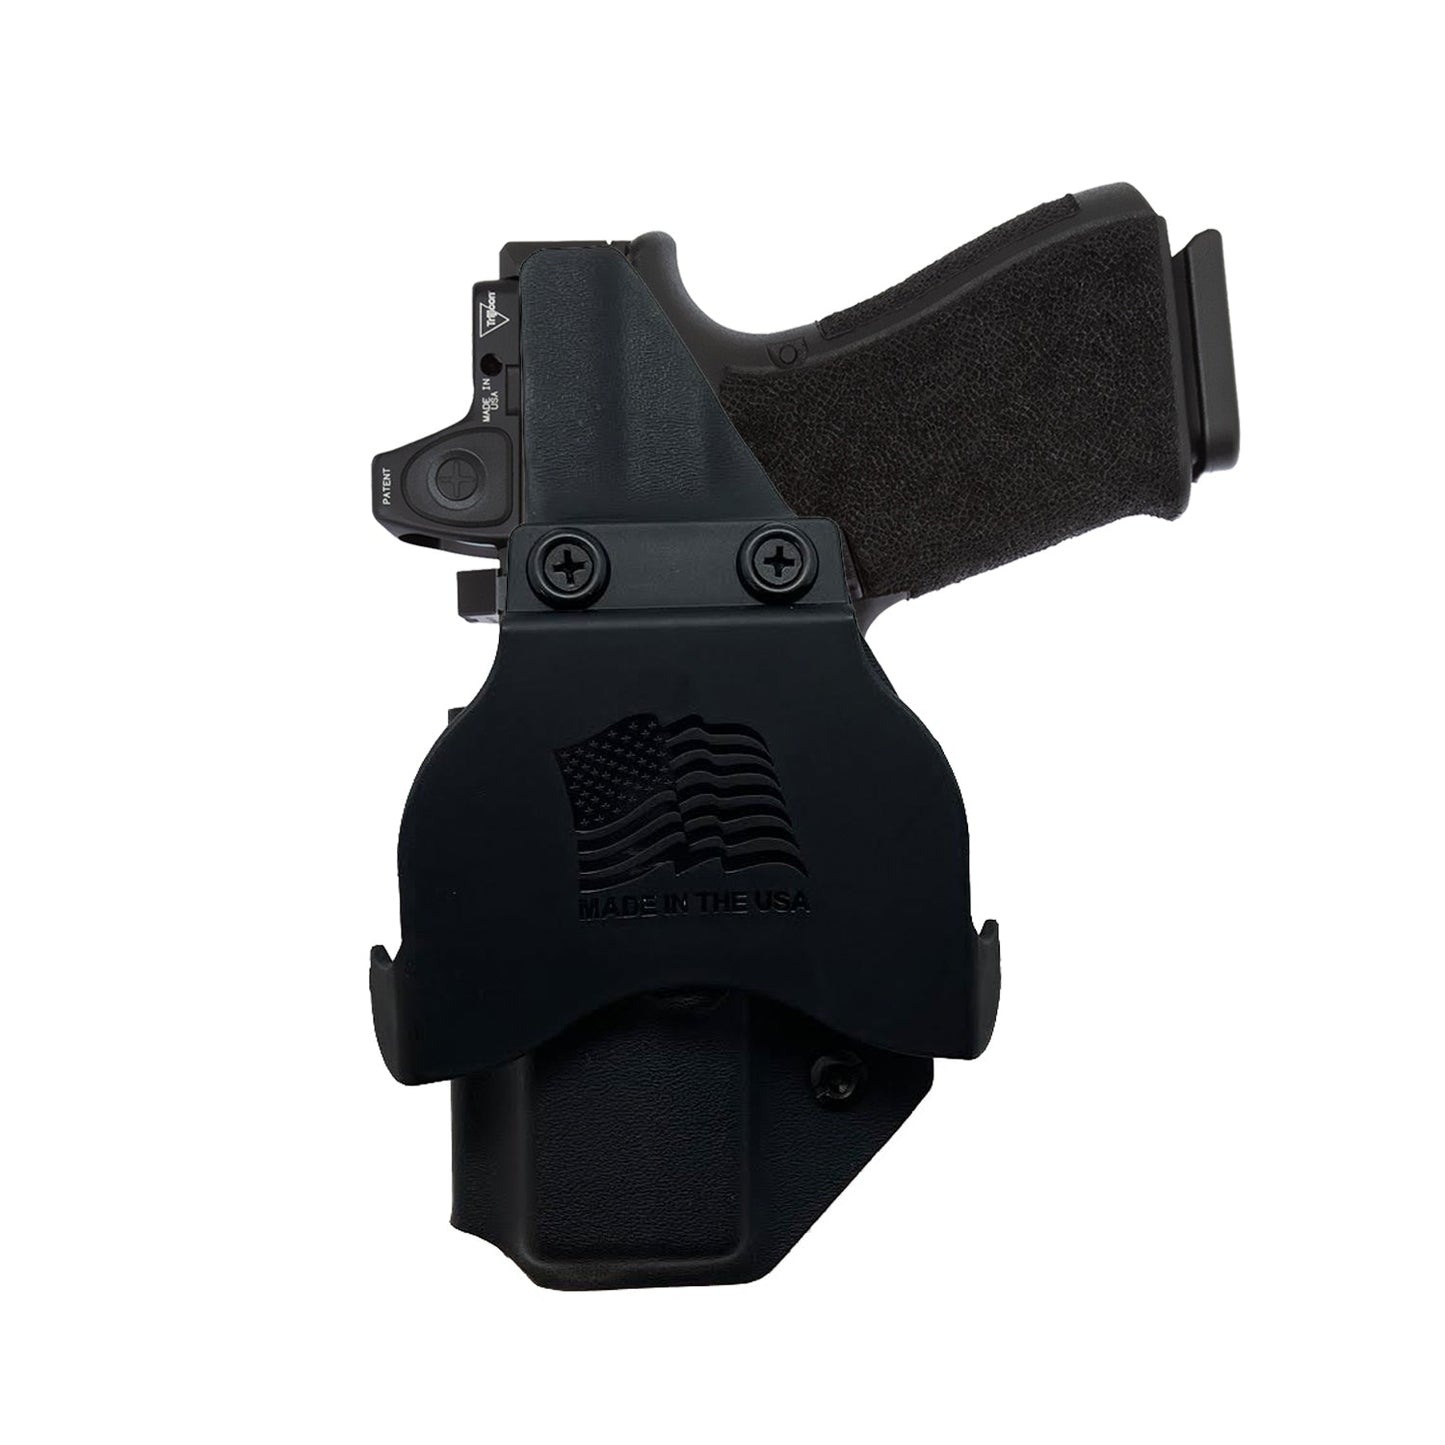 Ruger American Compact 9MM OWB (Outside The Waistband Holster)